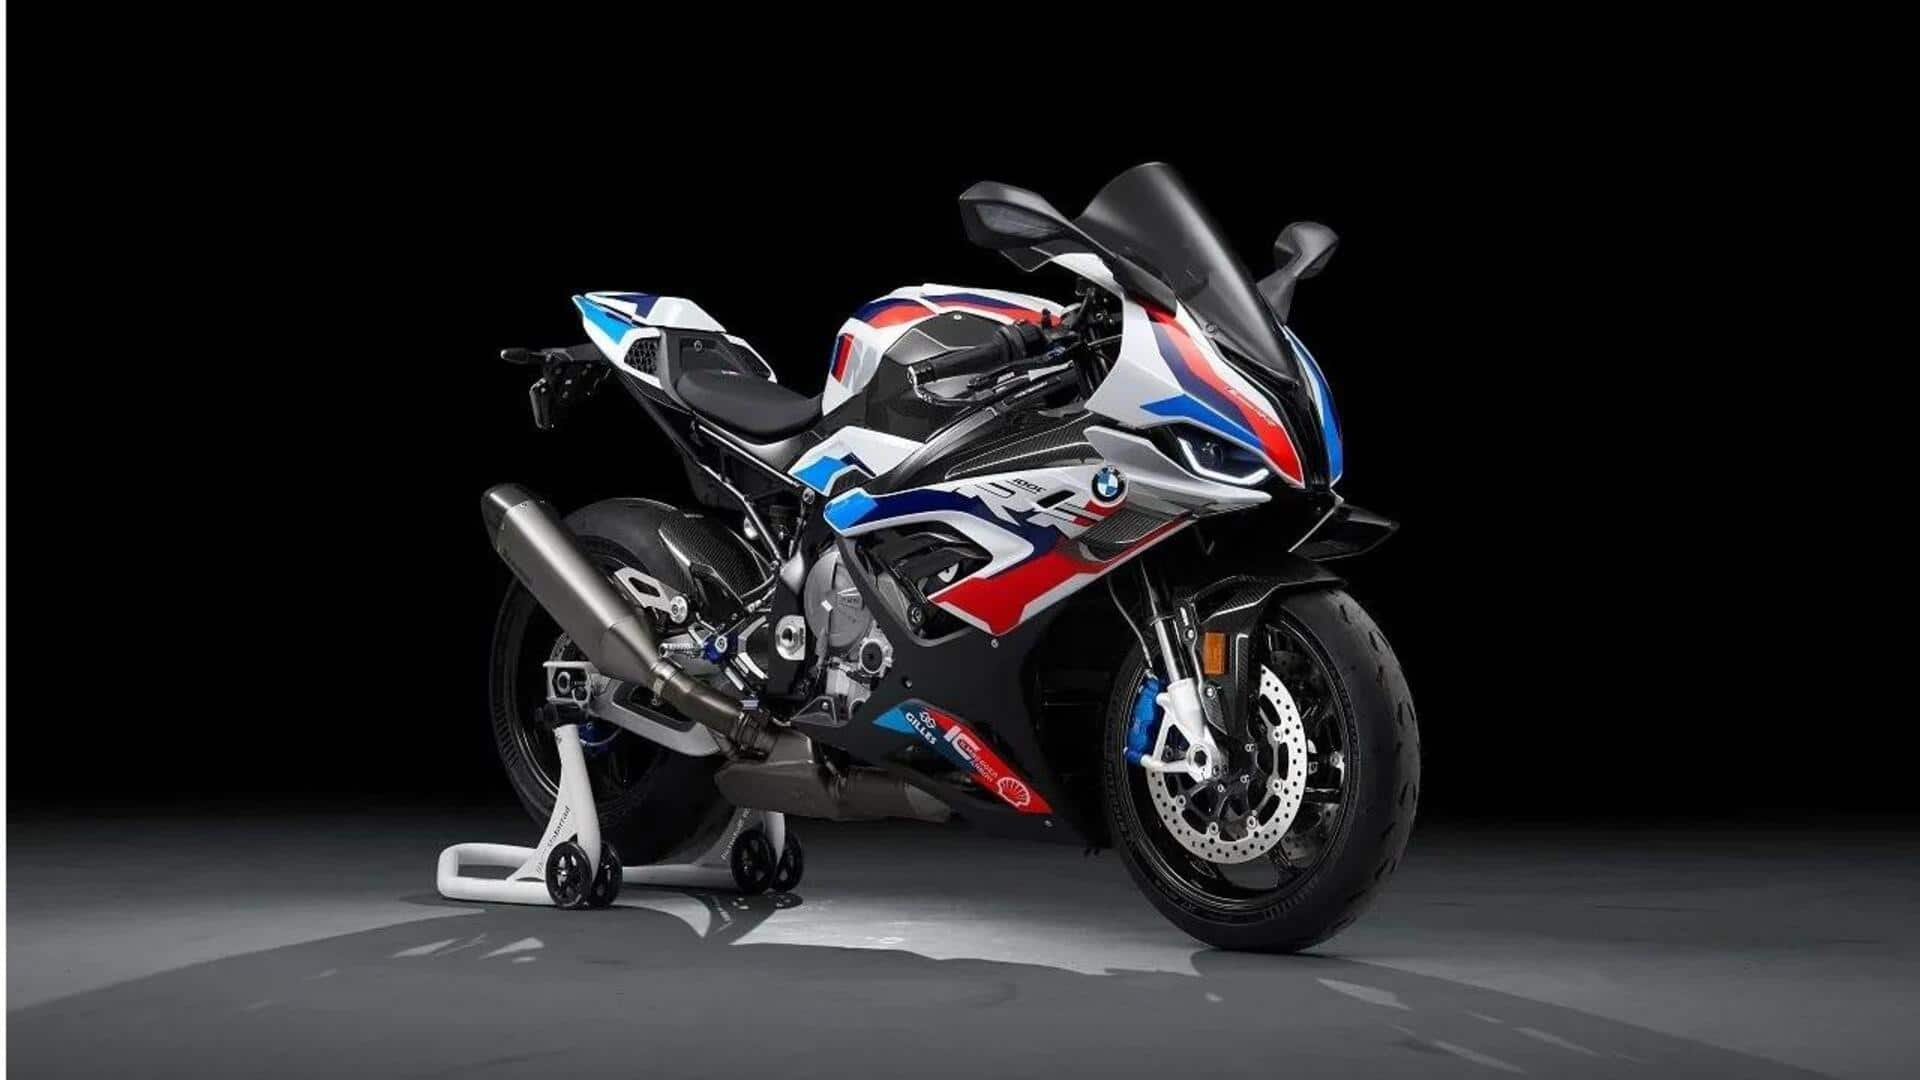 Deliveries of BMW M 1000 RR begin in India